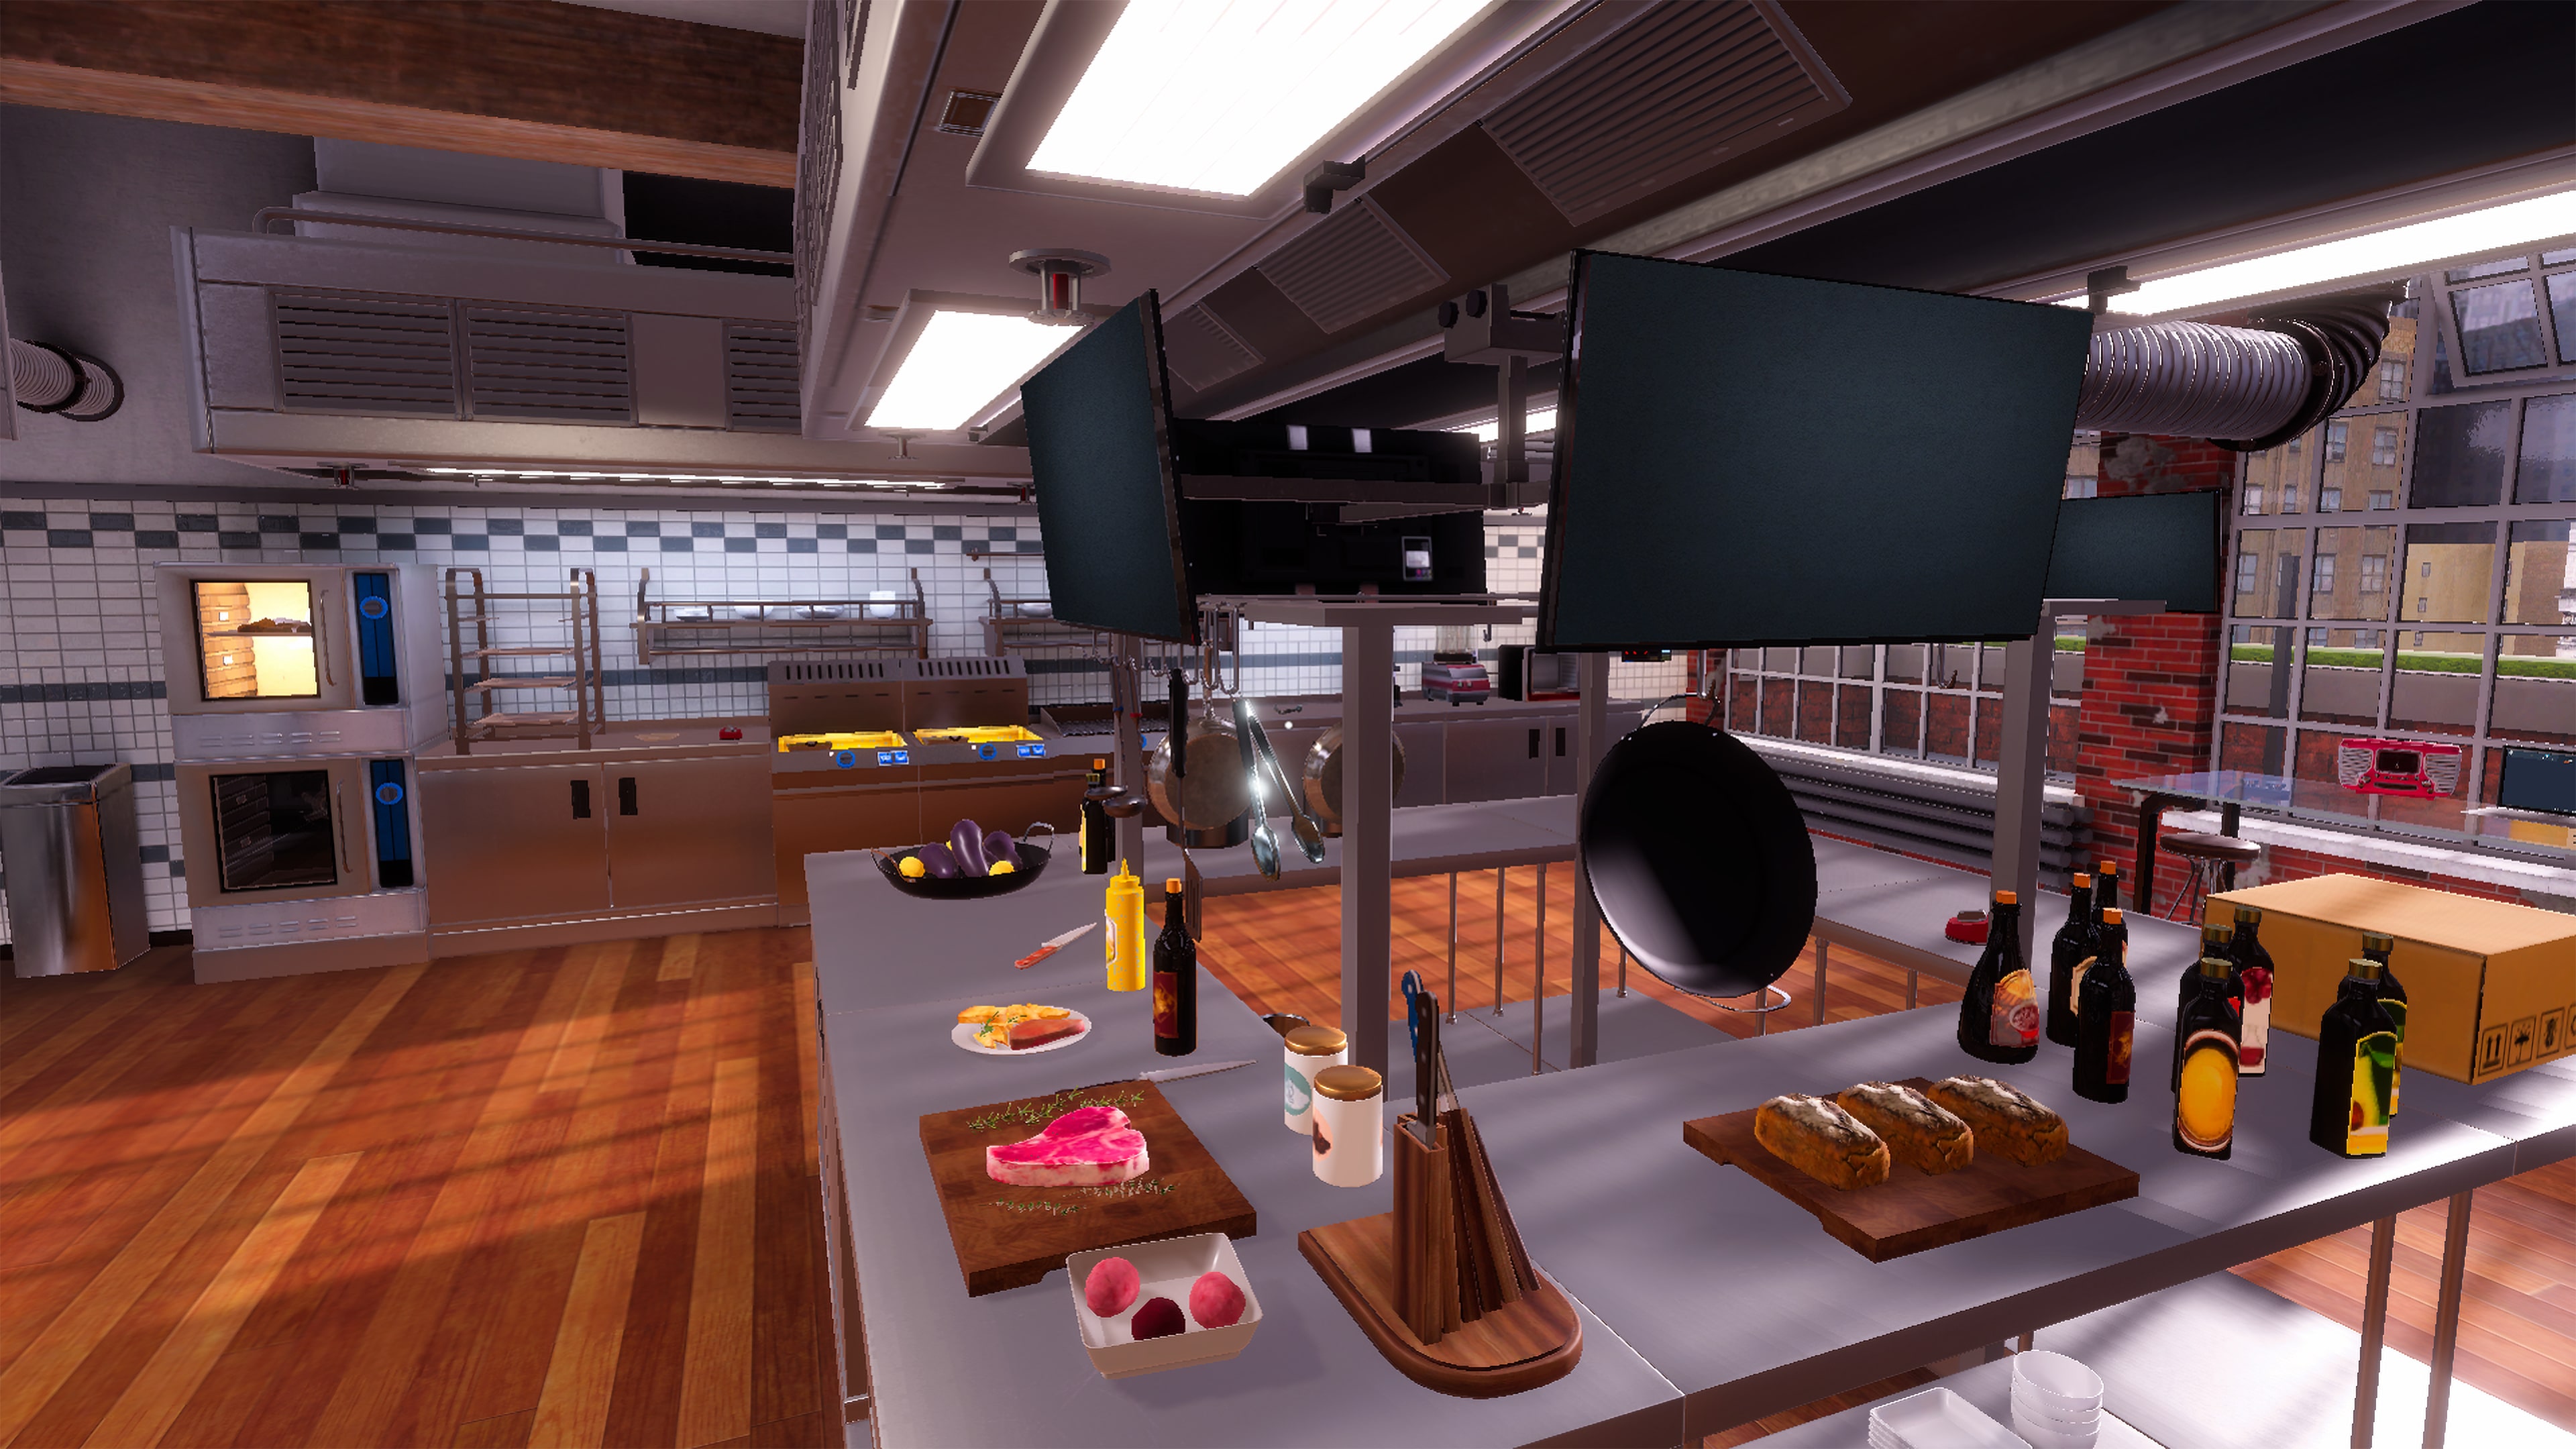 Pizza trophies in Cooking Simulator